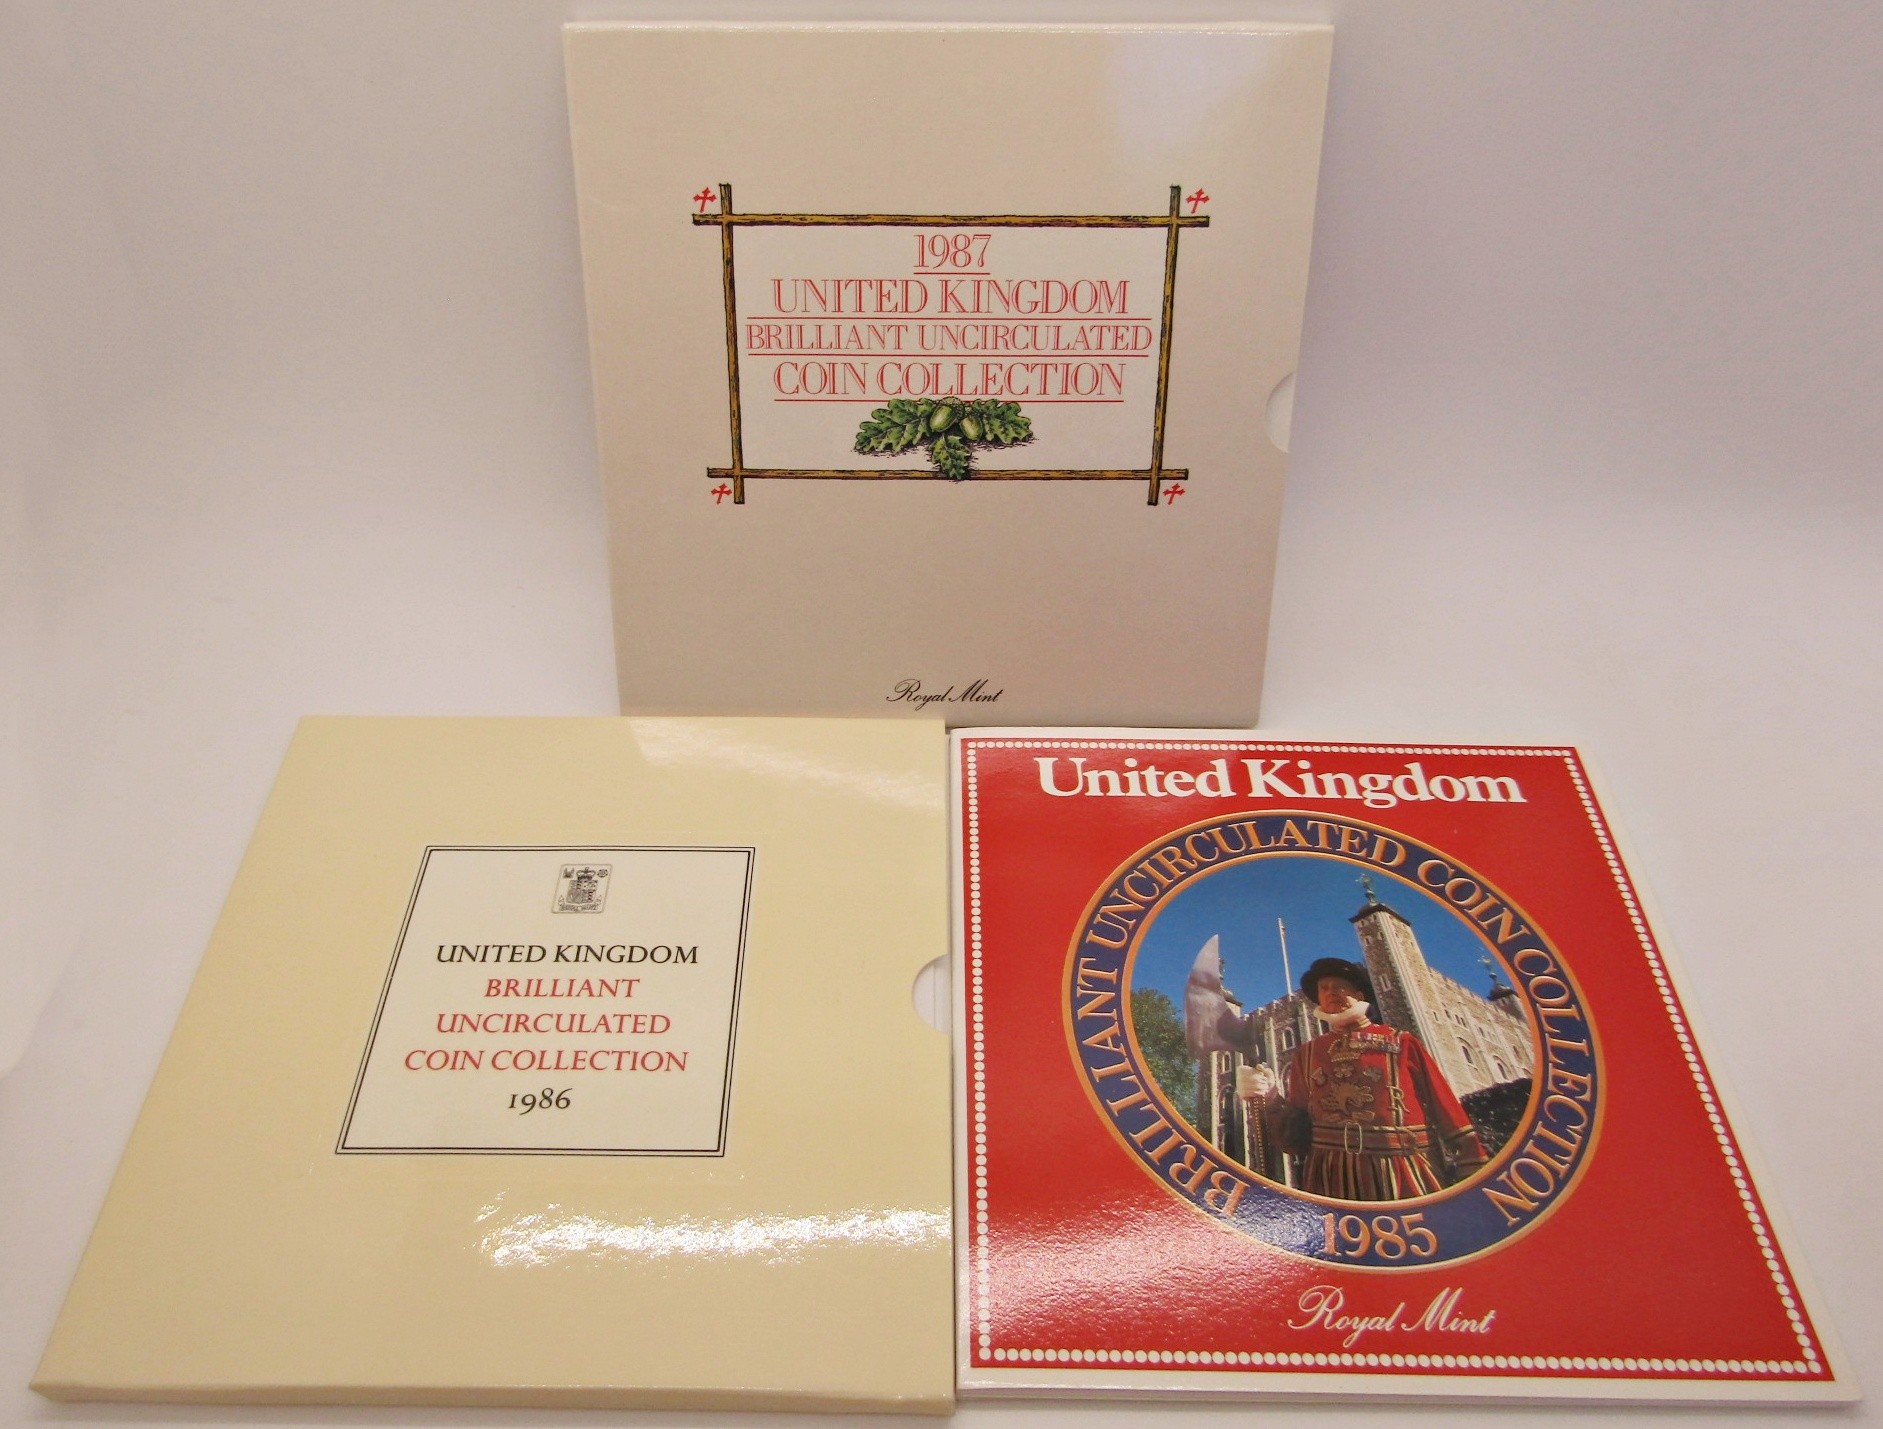 UK Brilliant uncirculated coin collections - 1982 x 2, 1983 x 3, 1984, 1985, 1986, 1987 - £1 - ½p